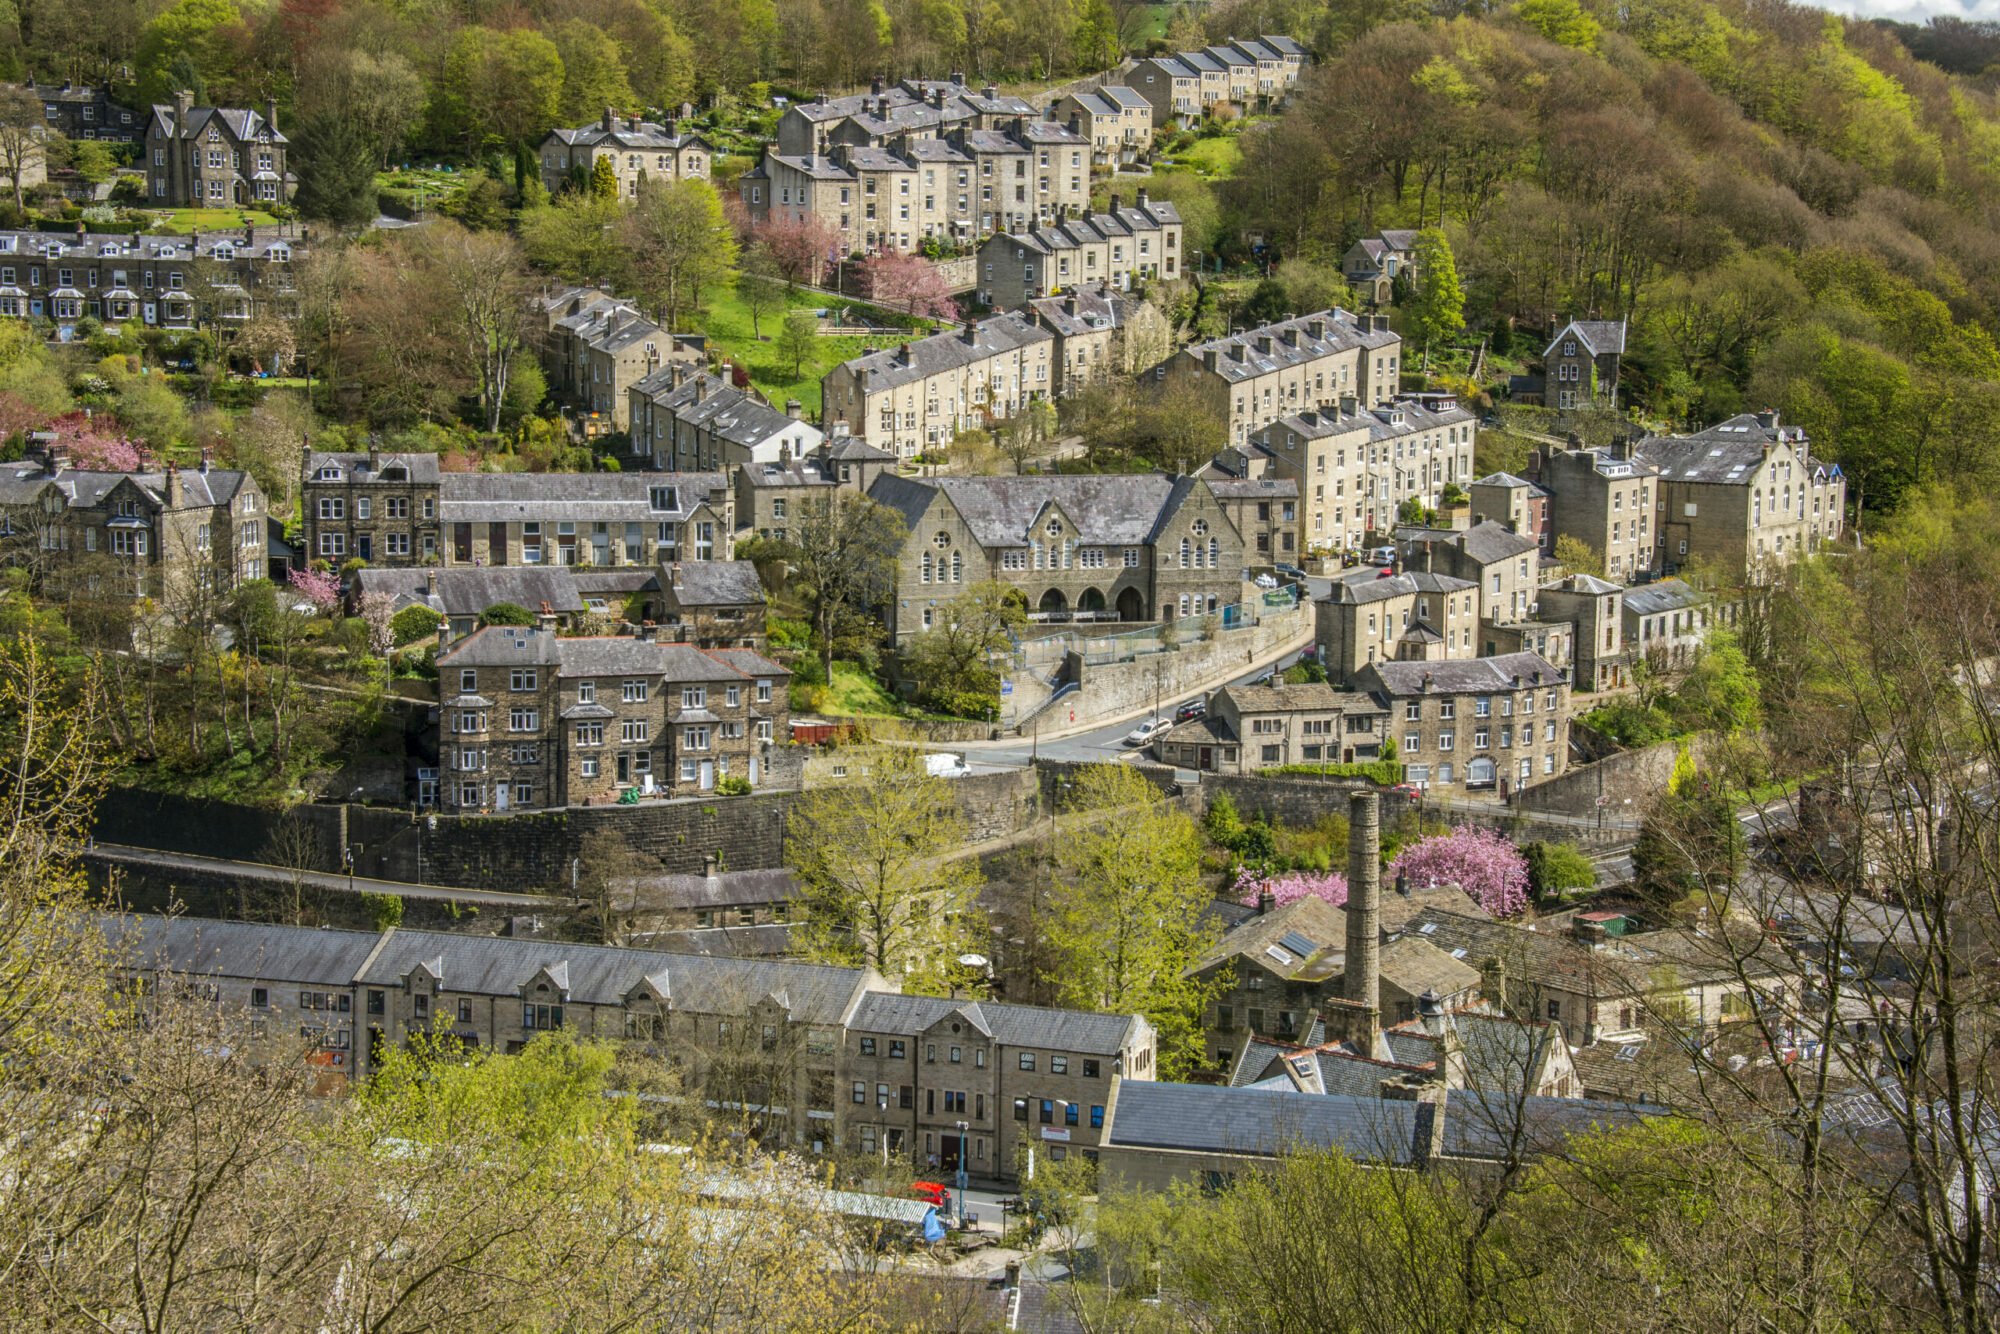 Image name shutterstock 274166933 scaled the 2 image from the post Haworth to Hebden Bridge in Yorkshire.com.